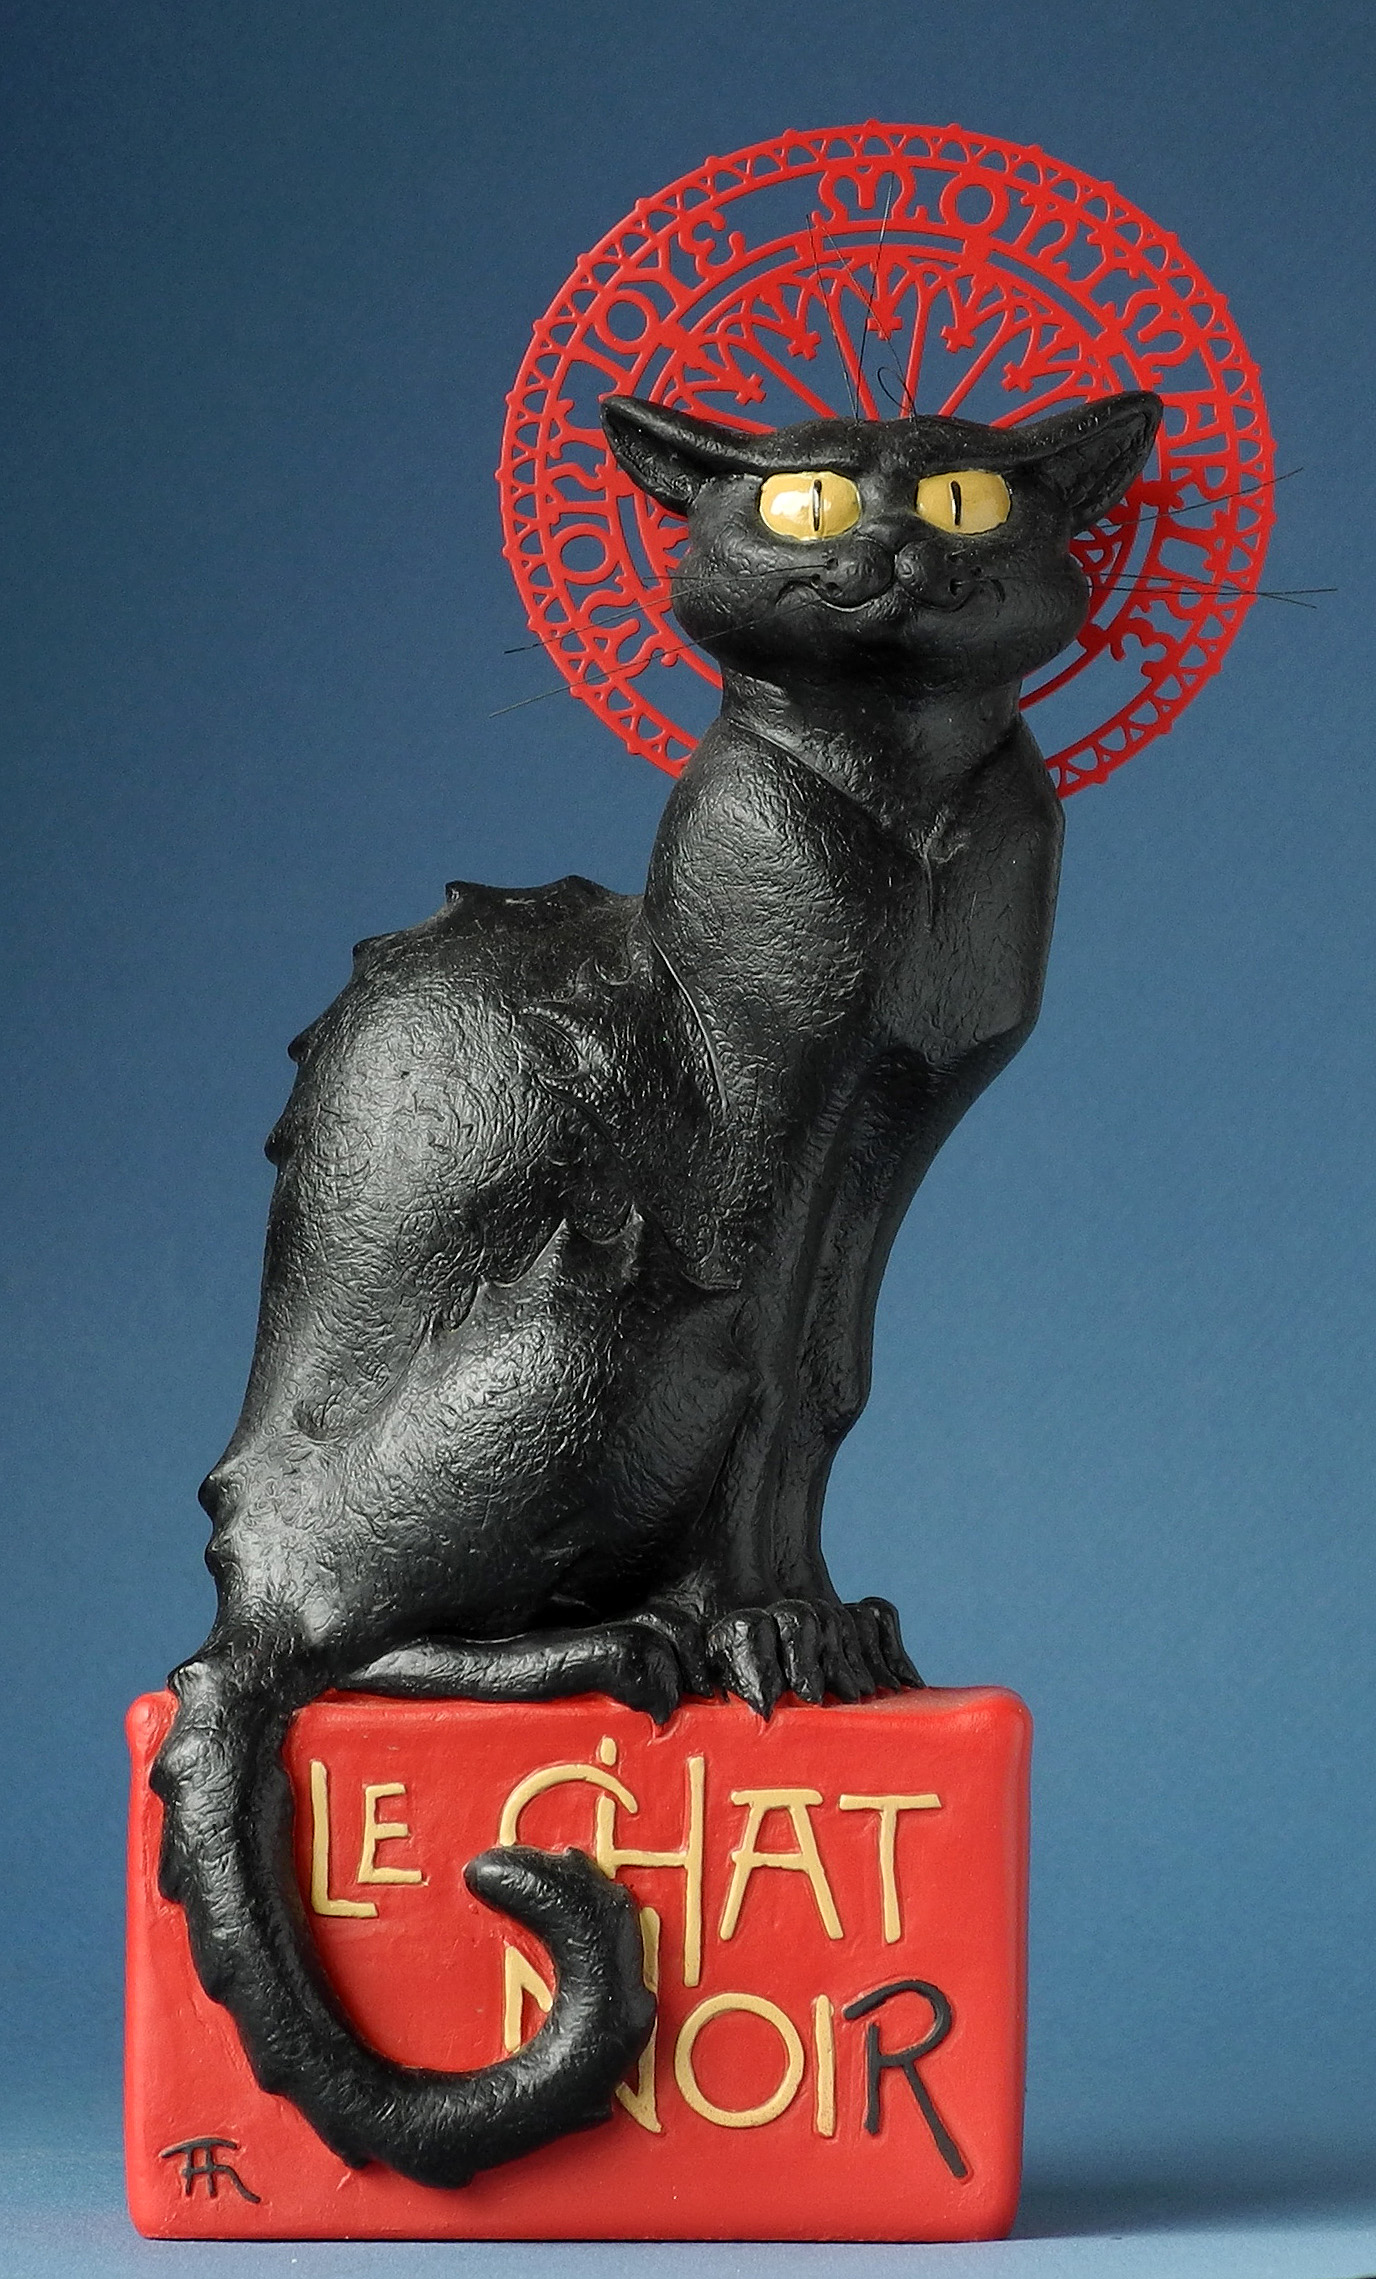 asistente Retirada sentido común Le Chat Noir - Popart Statues - Beautiful and affordable art imagery